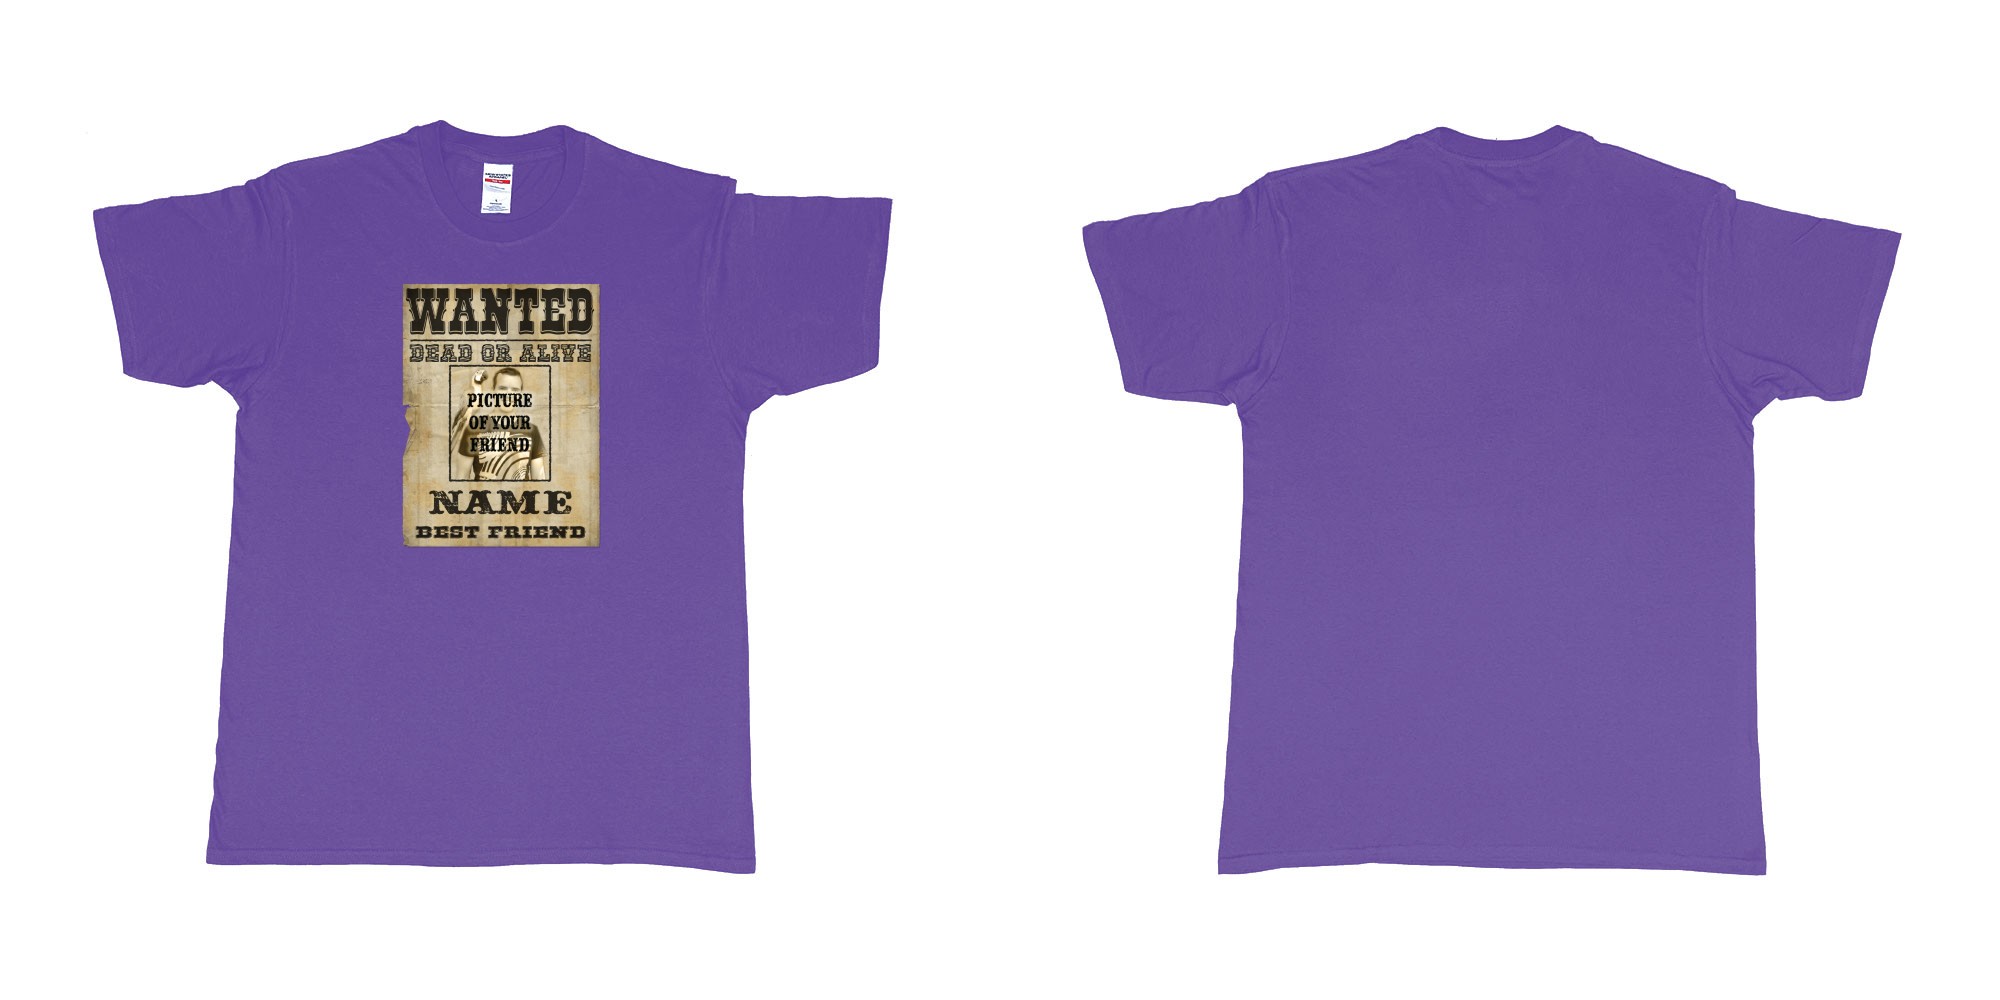 Custom tshirt design Wanted Poster in fabric color purple choice your own text made in Bali by The Pirate Way